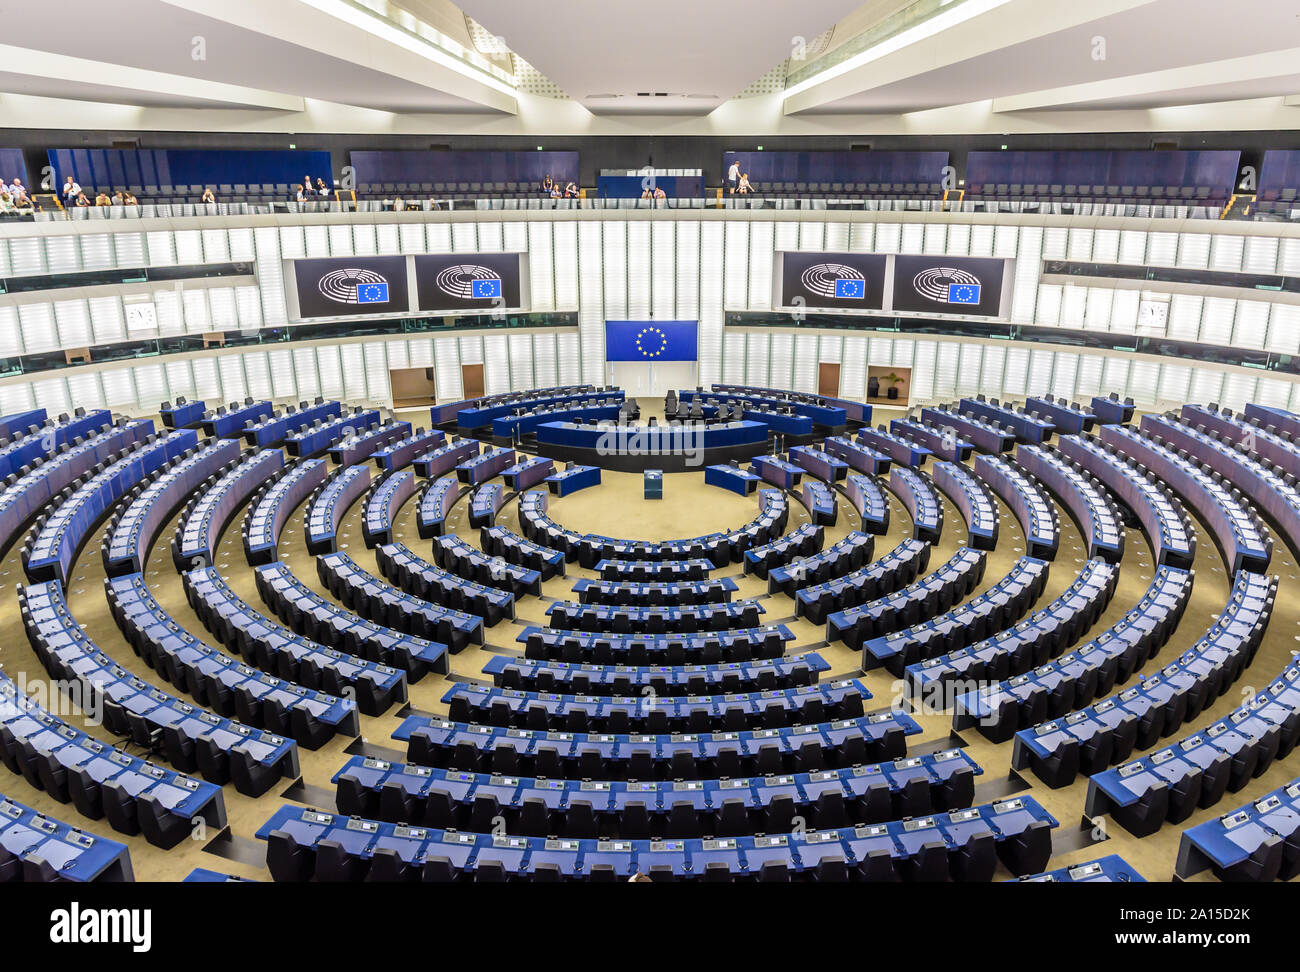 General view of the hemicycle of the European Parliament in Brussels, Belgium, with the flag of the European Union above the desk of the president. Stock Photo